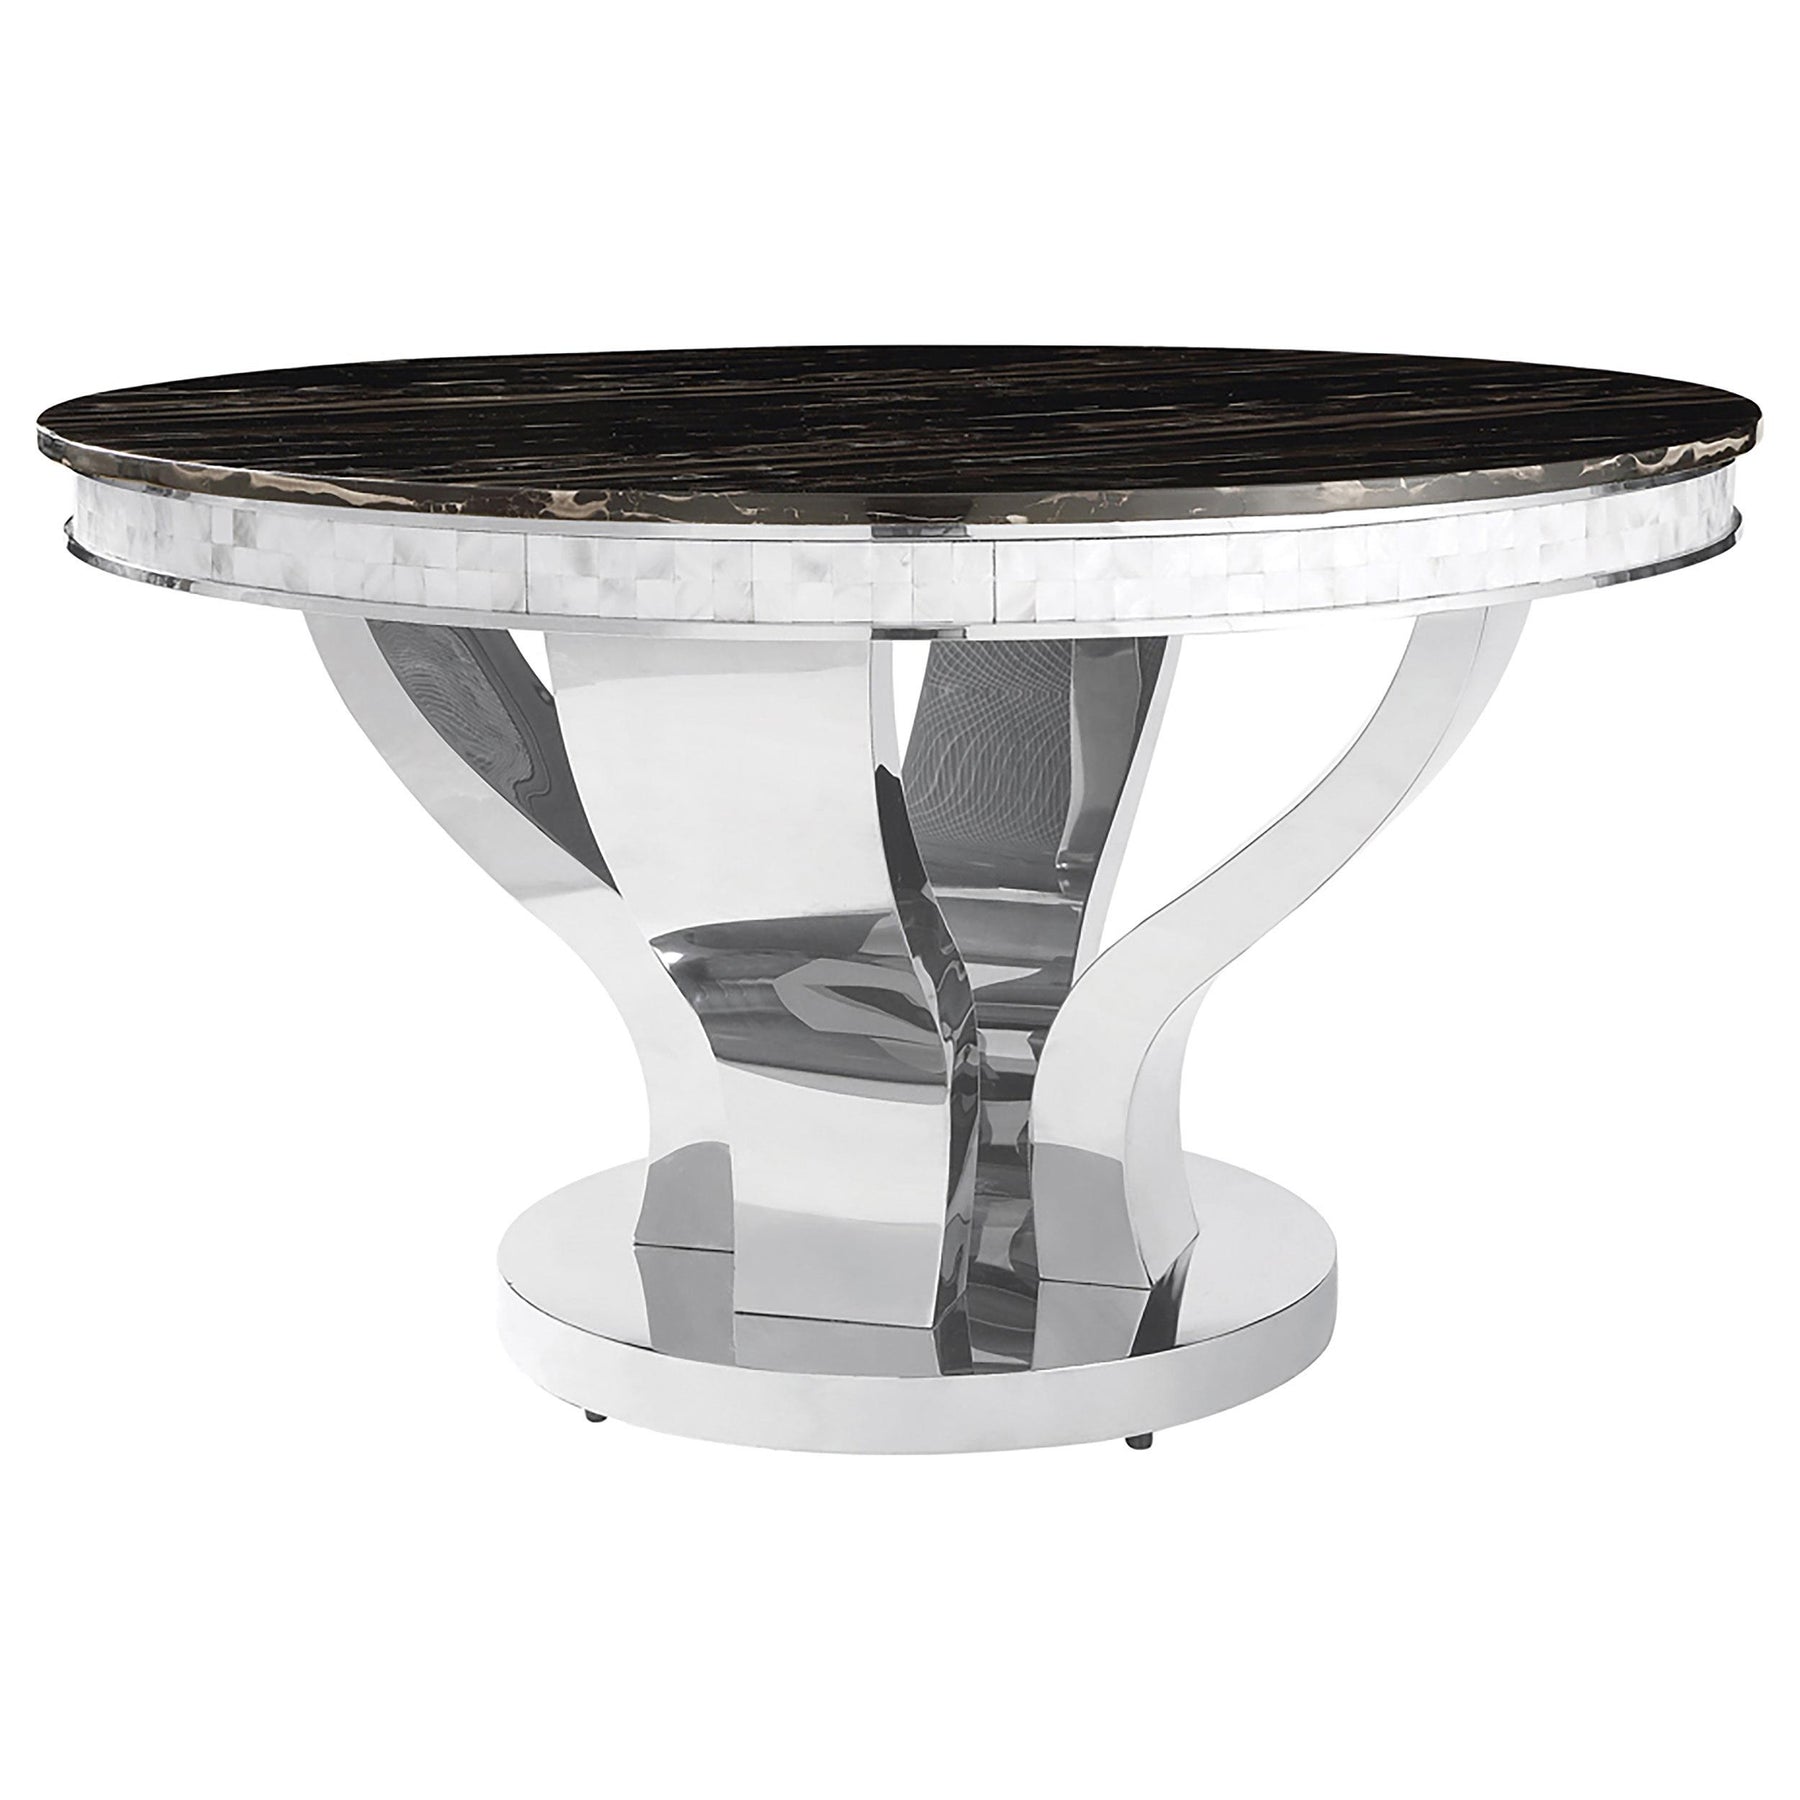 Anchorage Round Dining Table Chrome and Black Anchorage Round Dining Table Chrome and Black Half Price Furniture